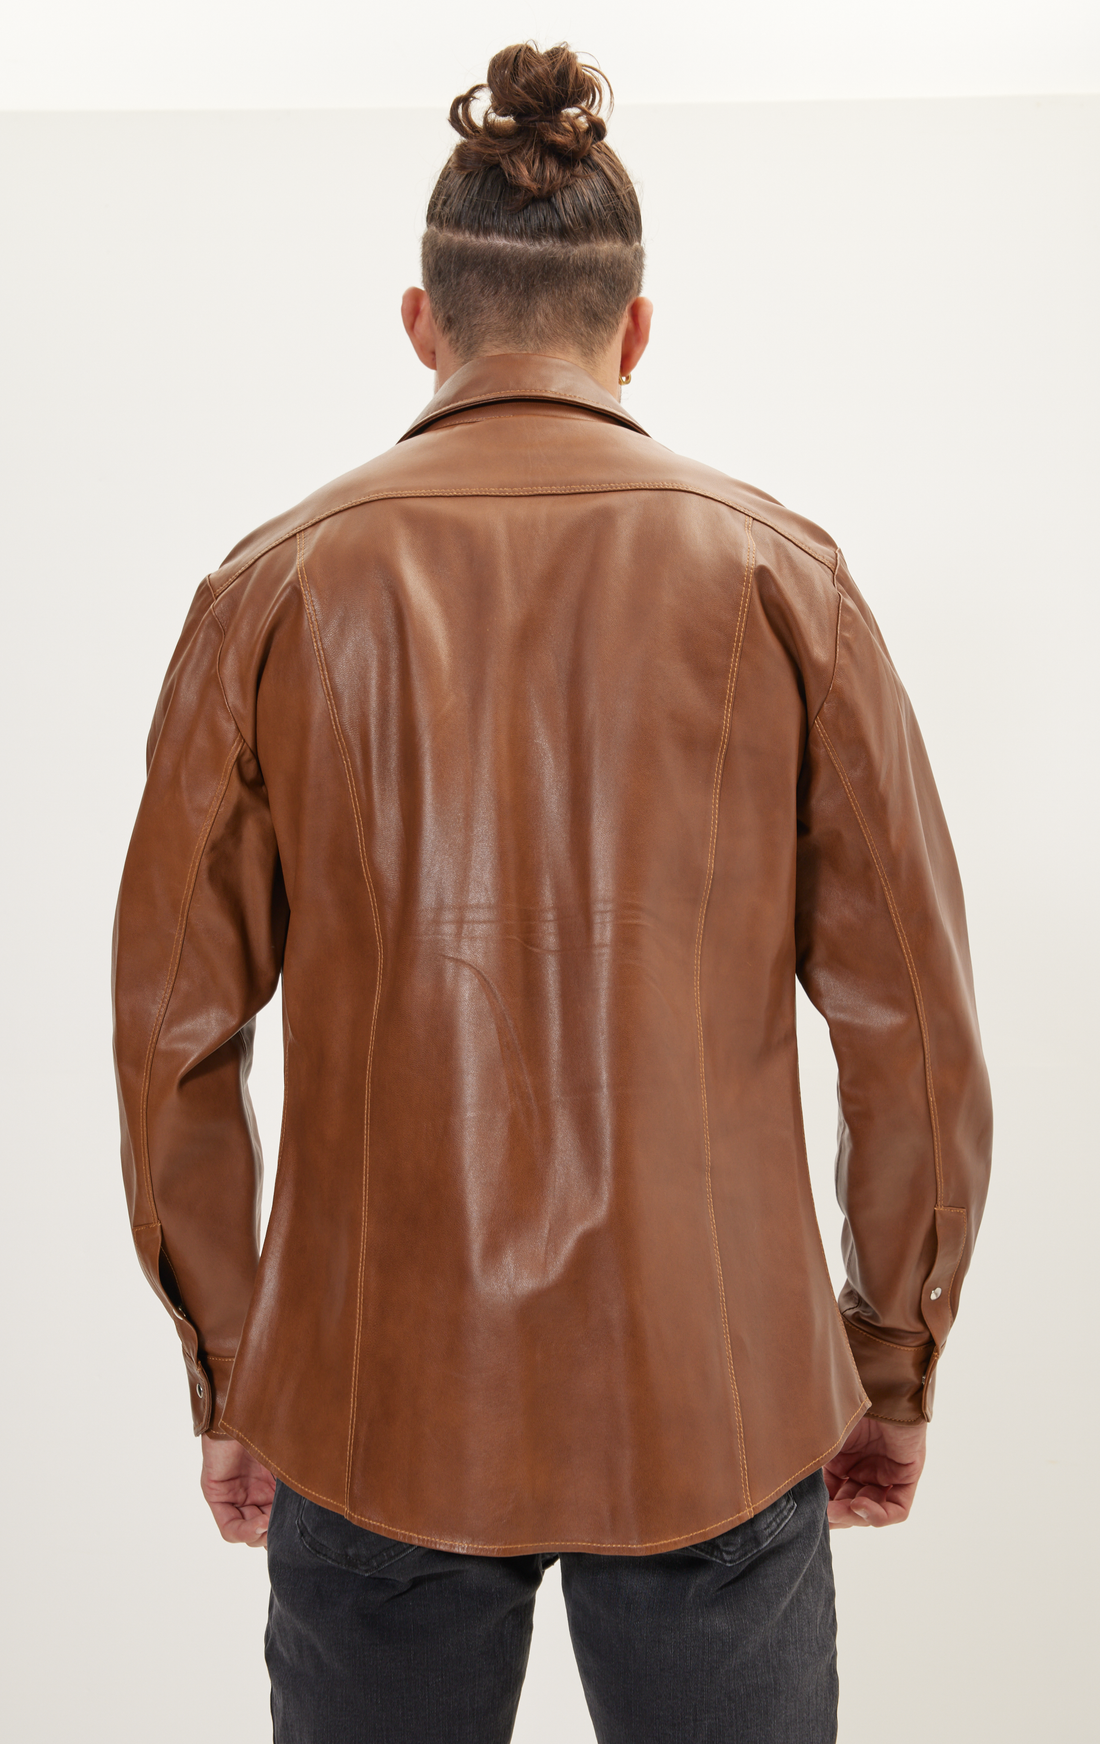 Z Genuine Leather Shirt With Zipper Closure - Brown